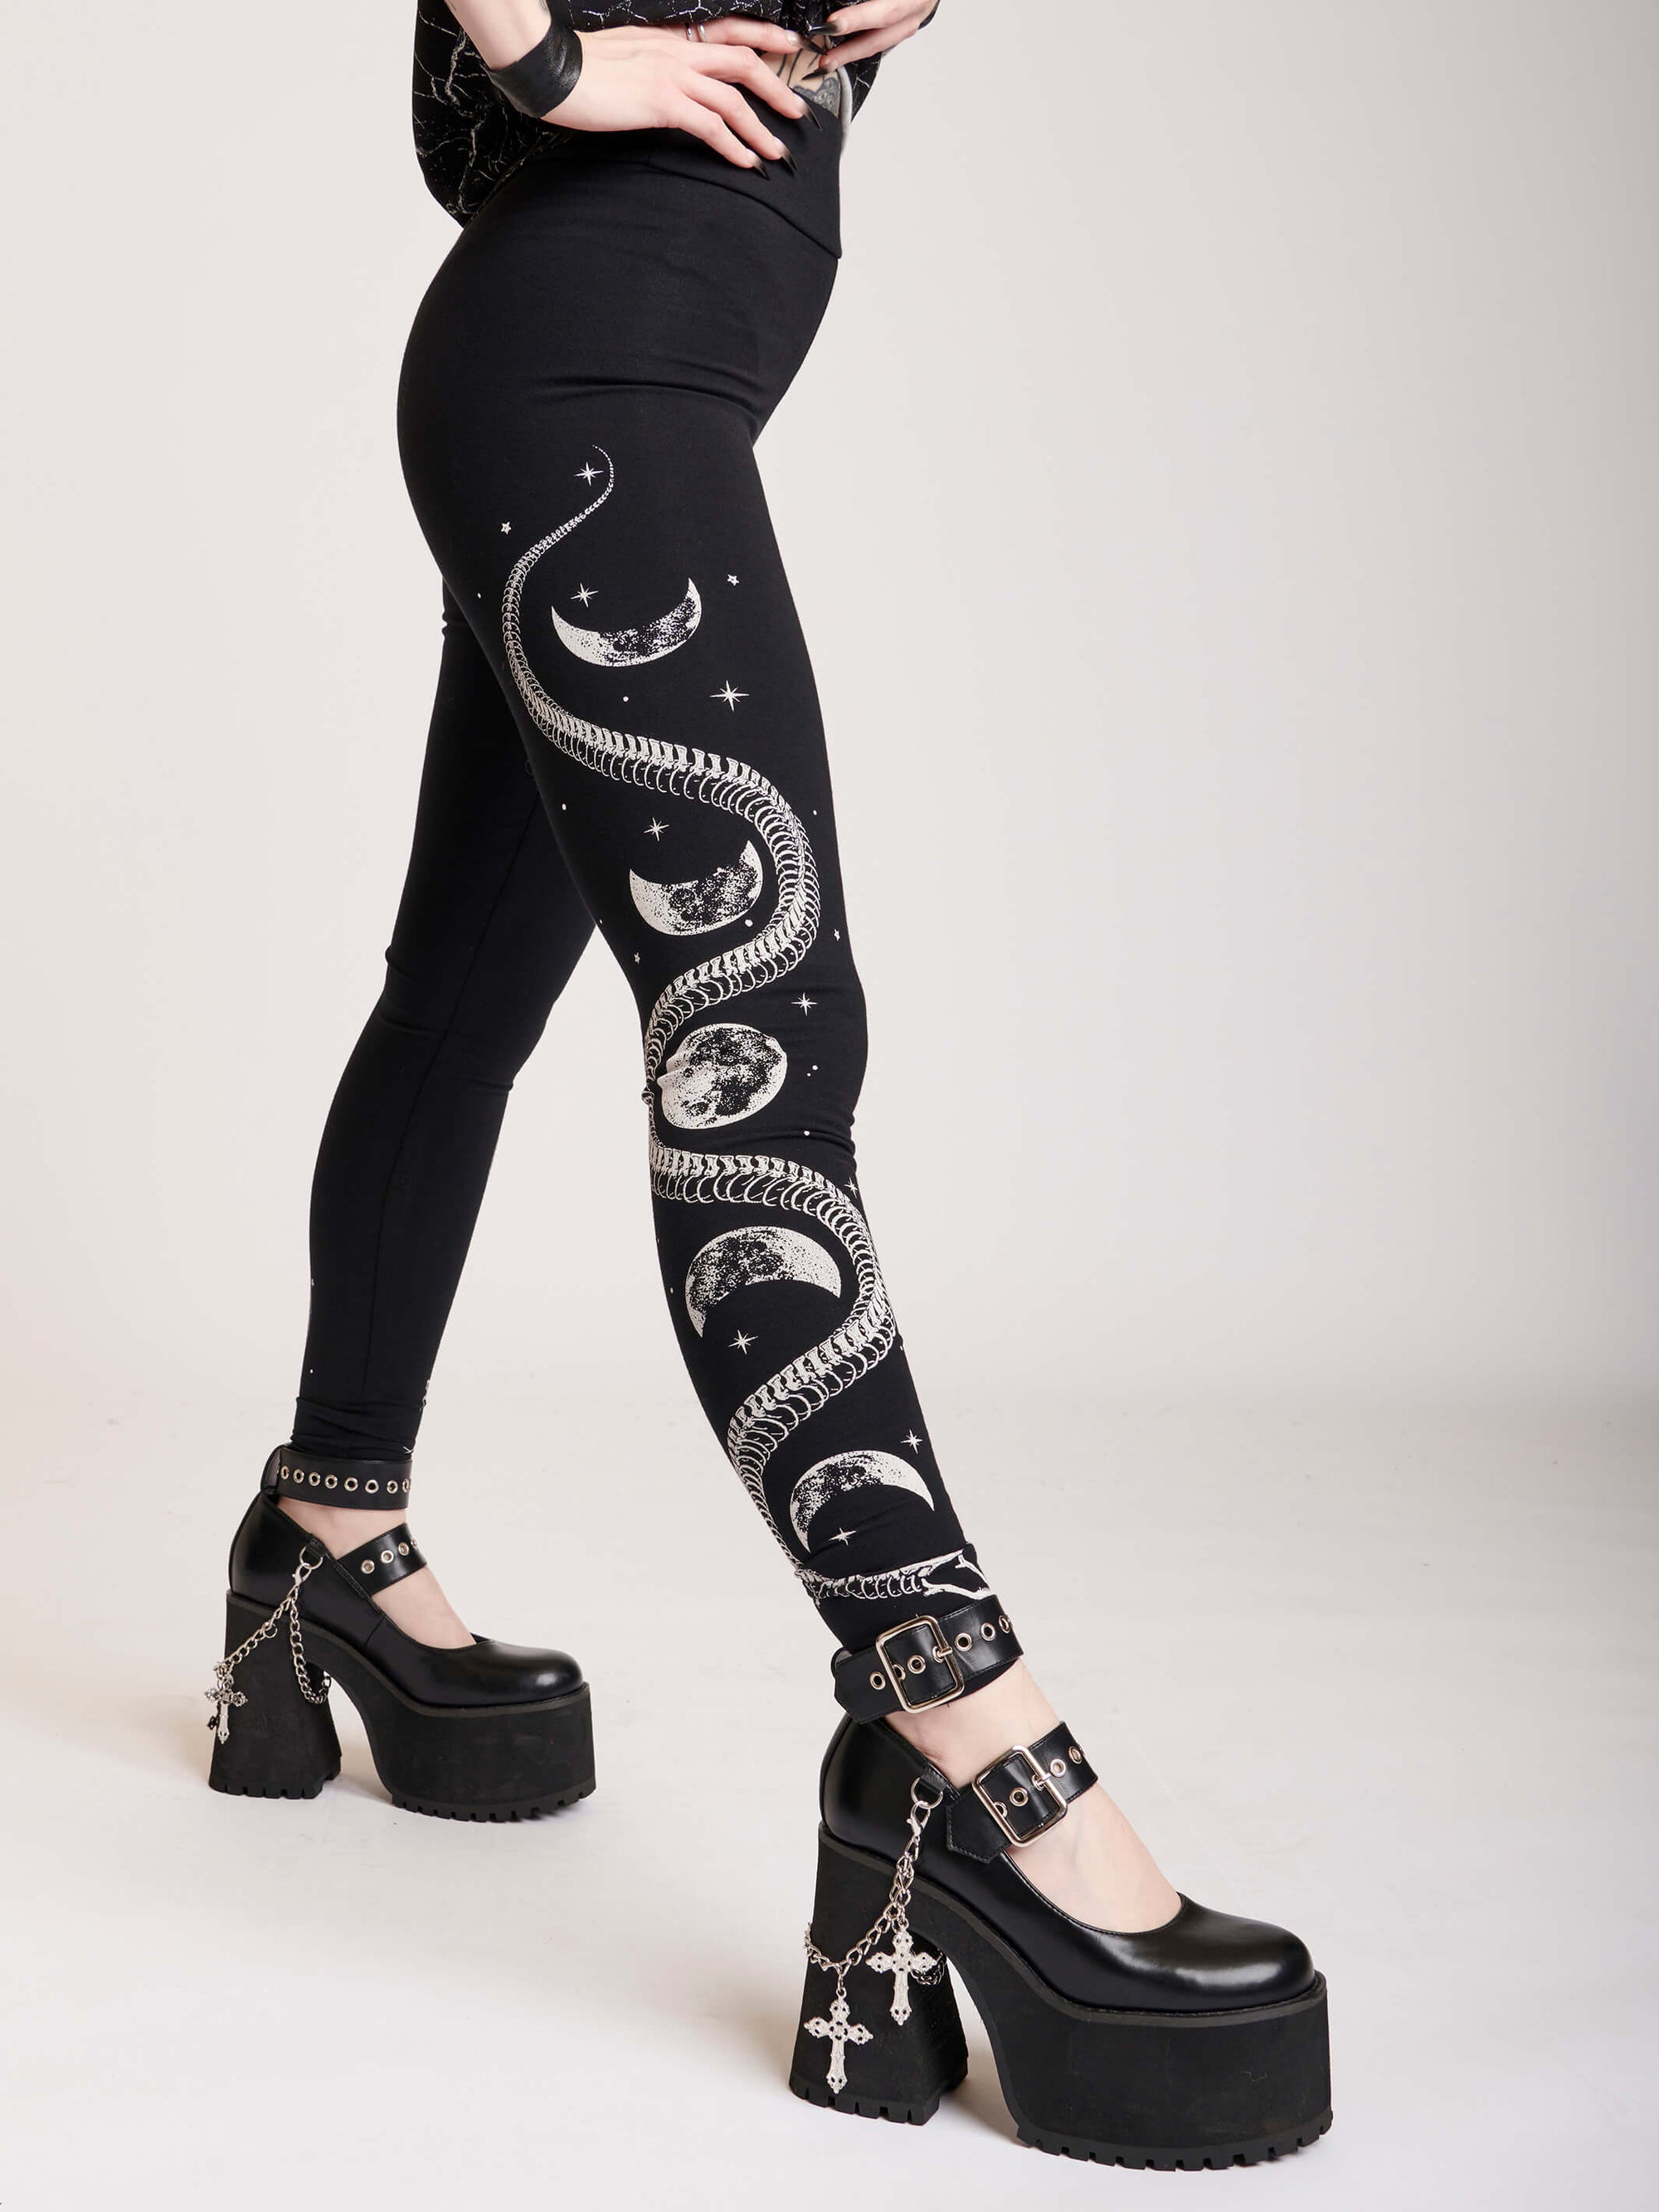 Black legging with skeleton snake and moon phase graphibs down the sides.